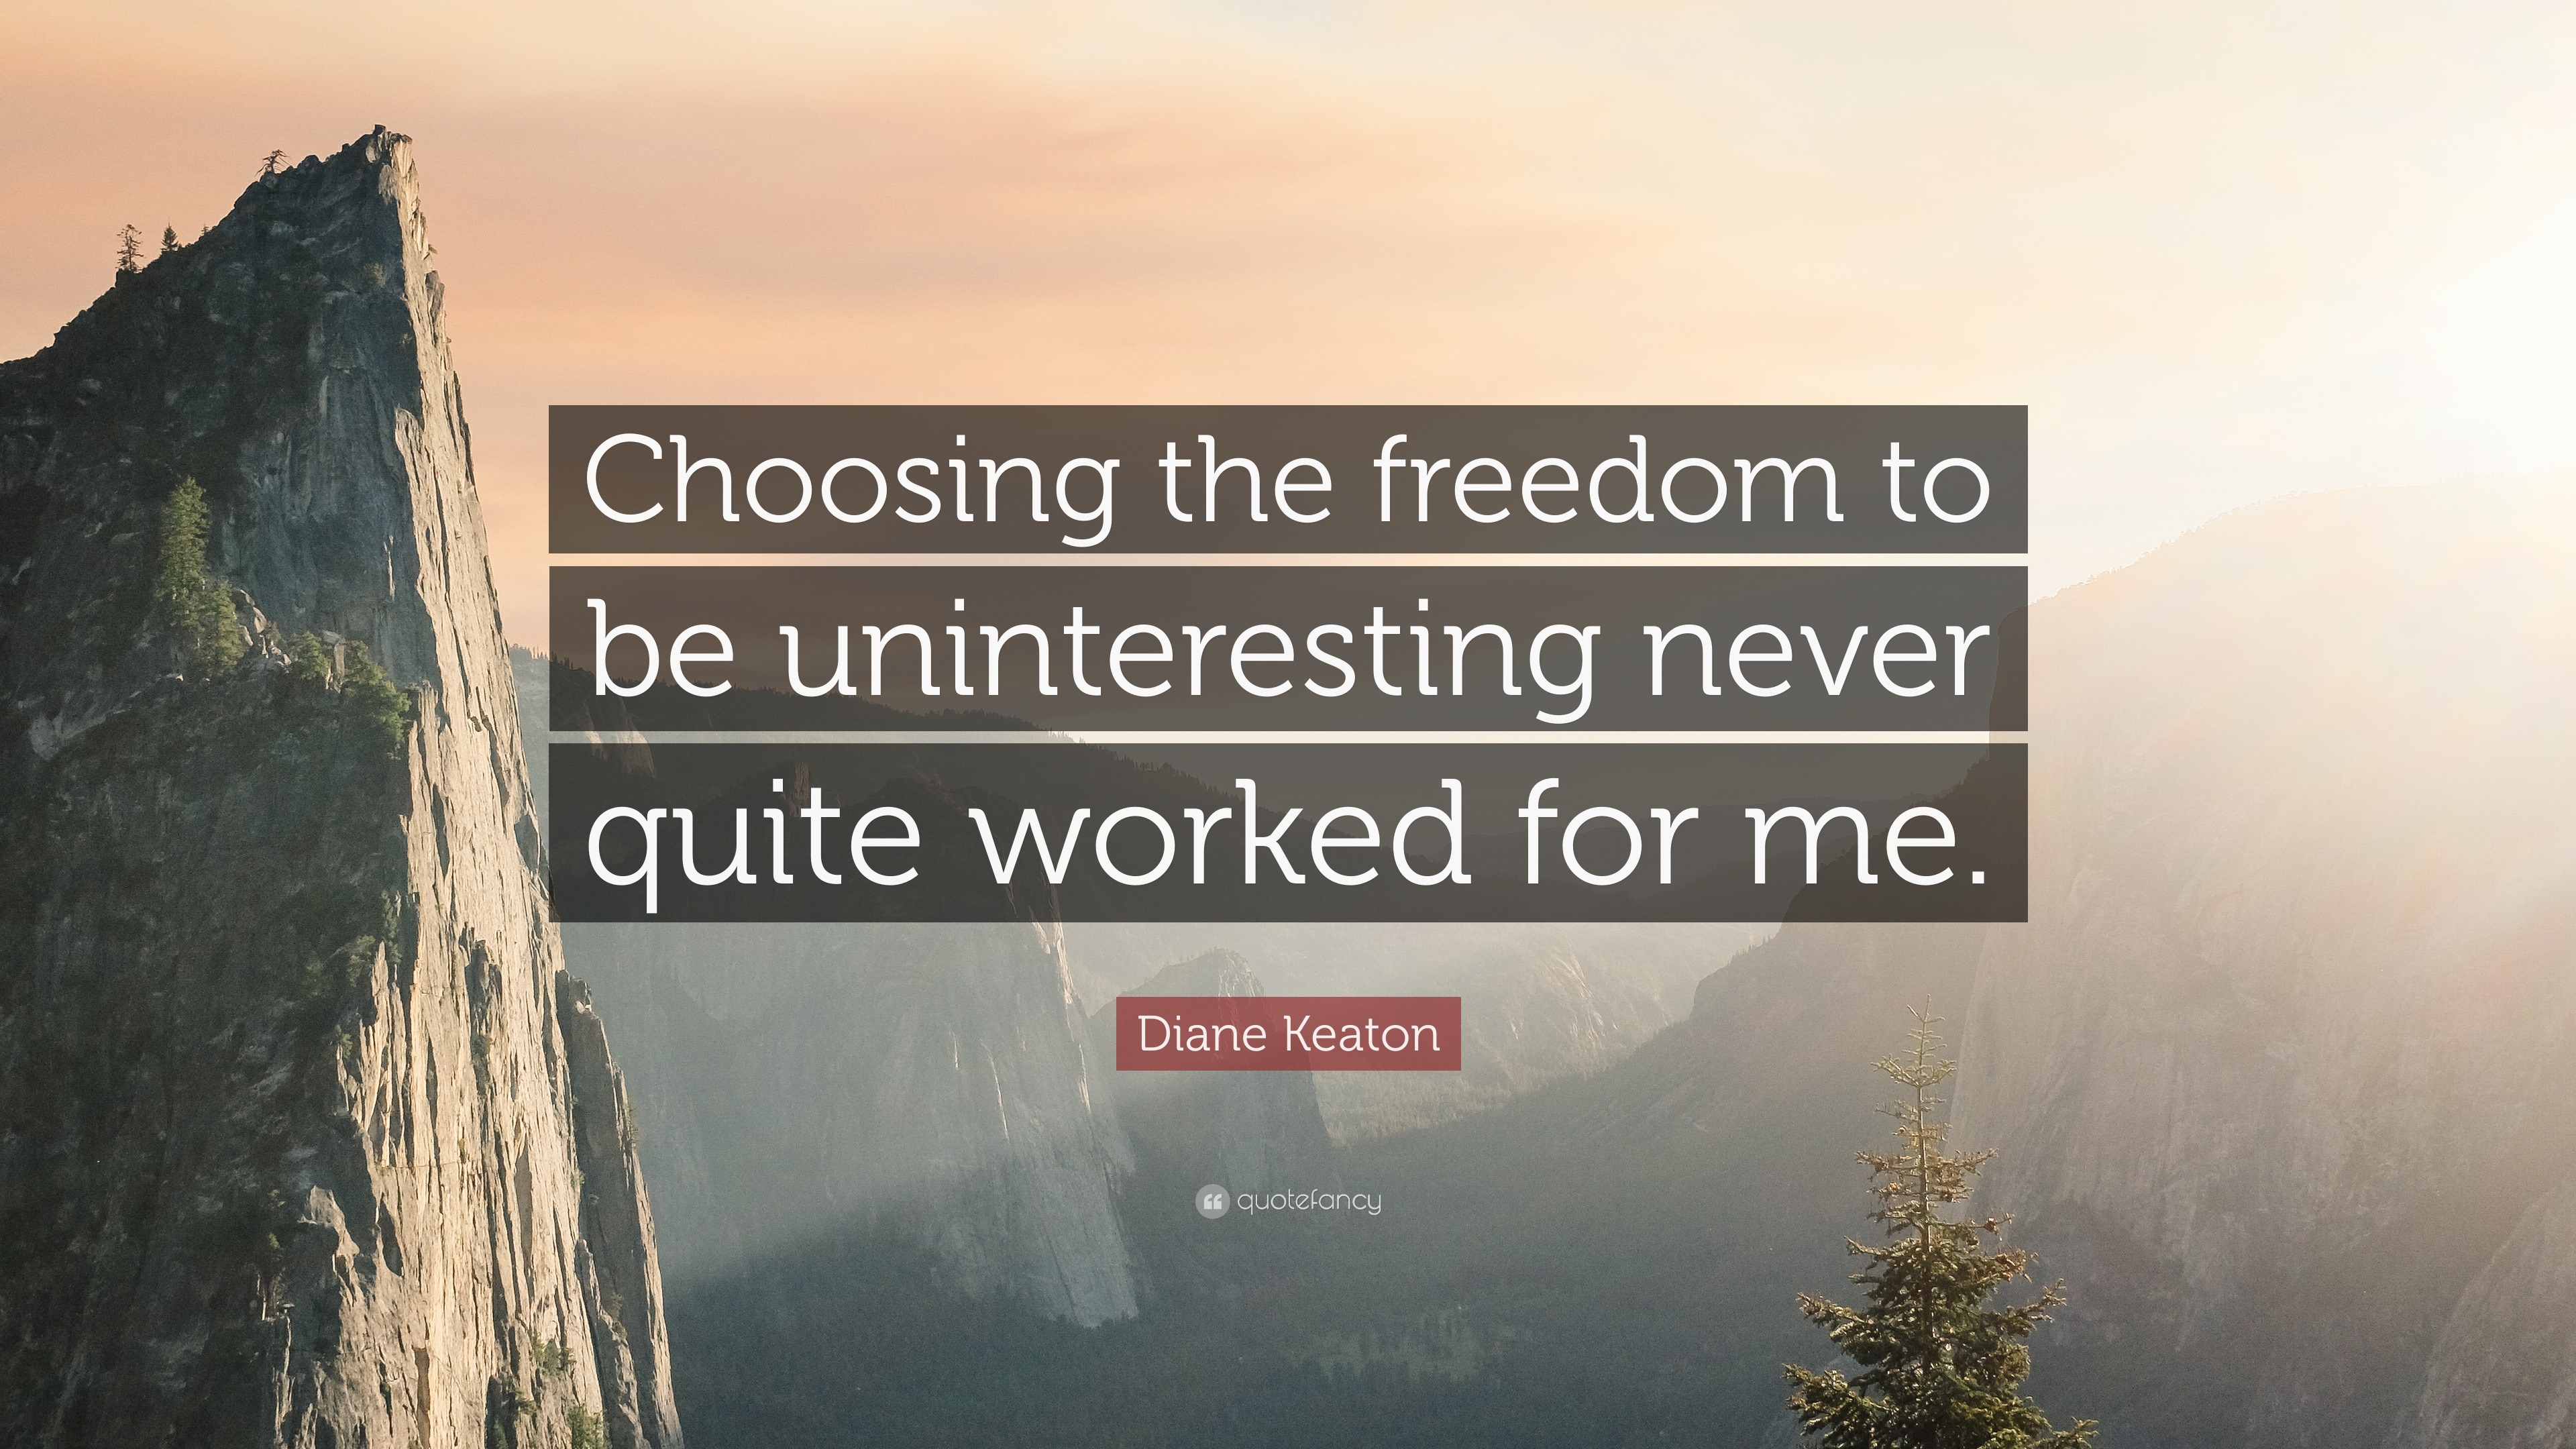 Diane Keaton Quote: “Choosing the freedom to be uninteresting never ...